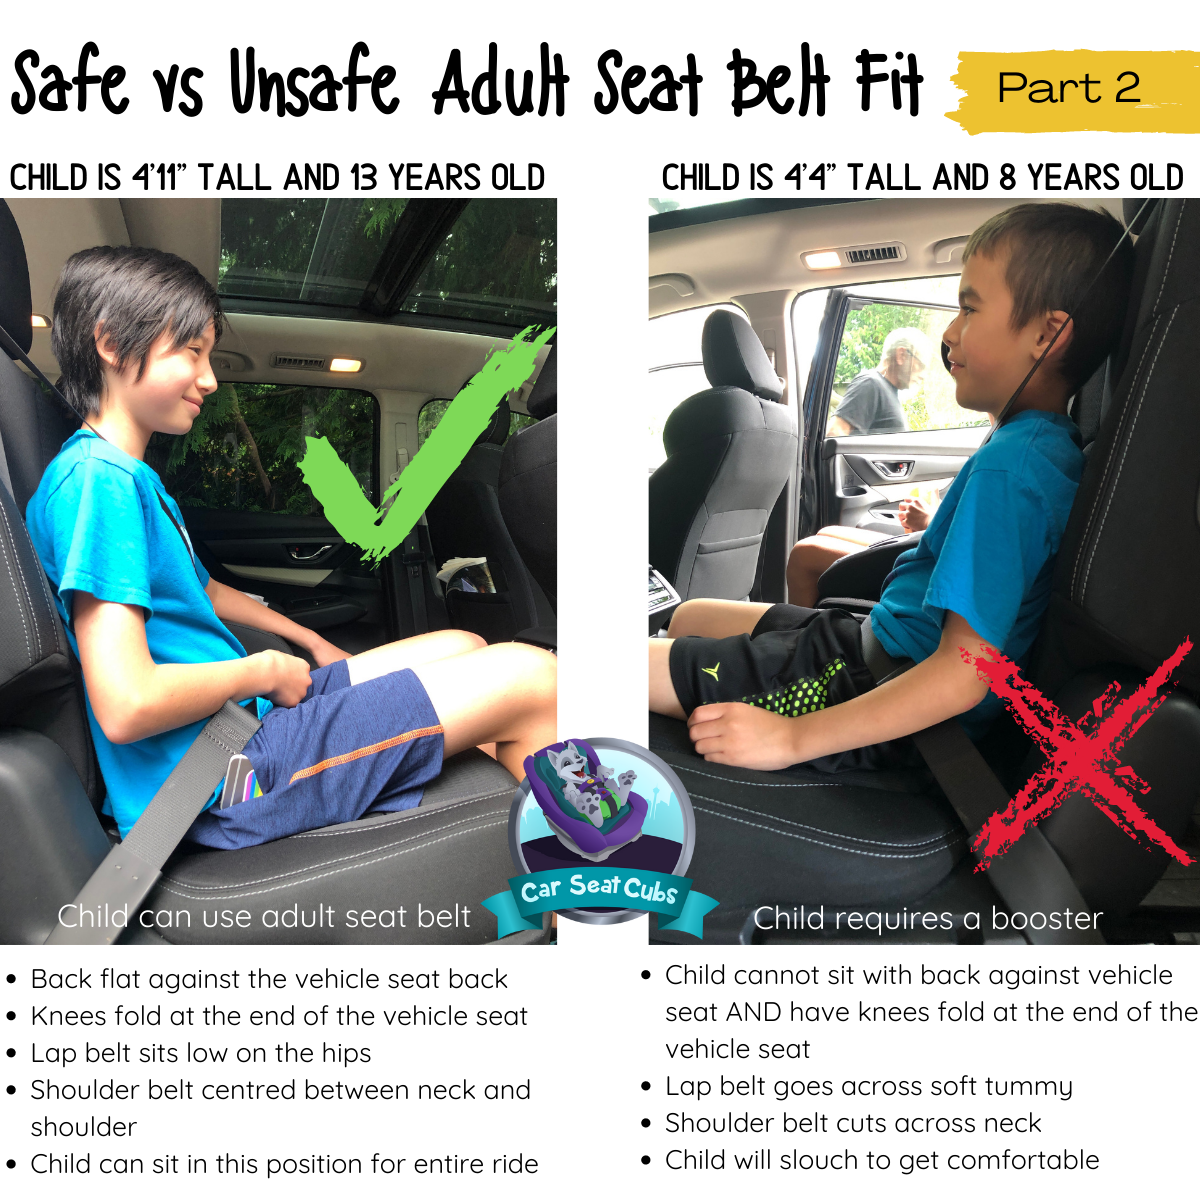 https://mamanloupsden.com/wp-content/uploads/2019/04/mamanloupsden.com-booster-seats-for-big-kids-helicopter-parenting-or-common-sense-hint-its-the-latter-2.png